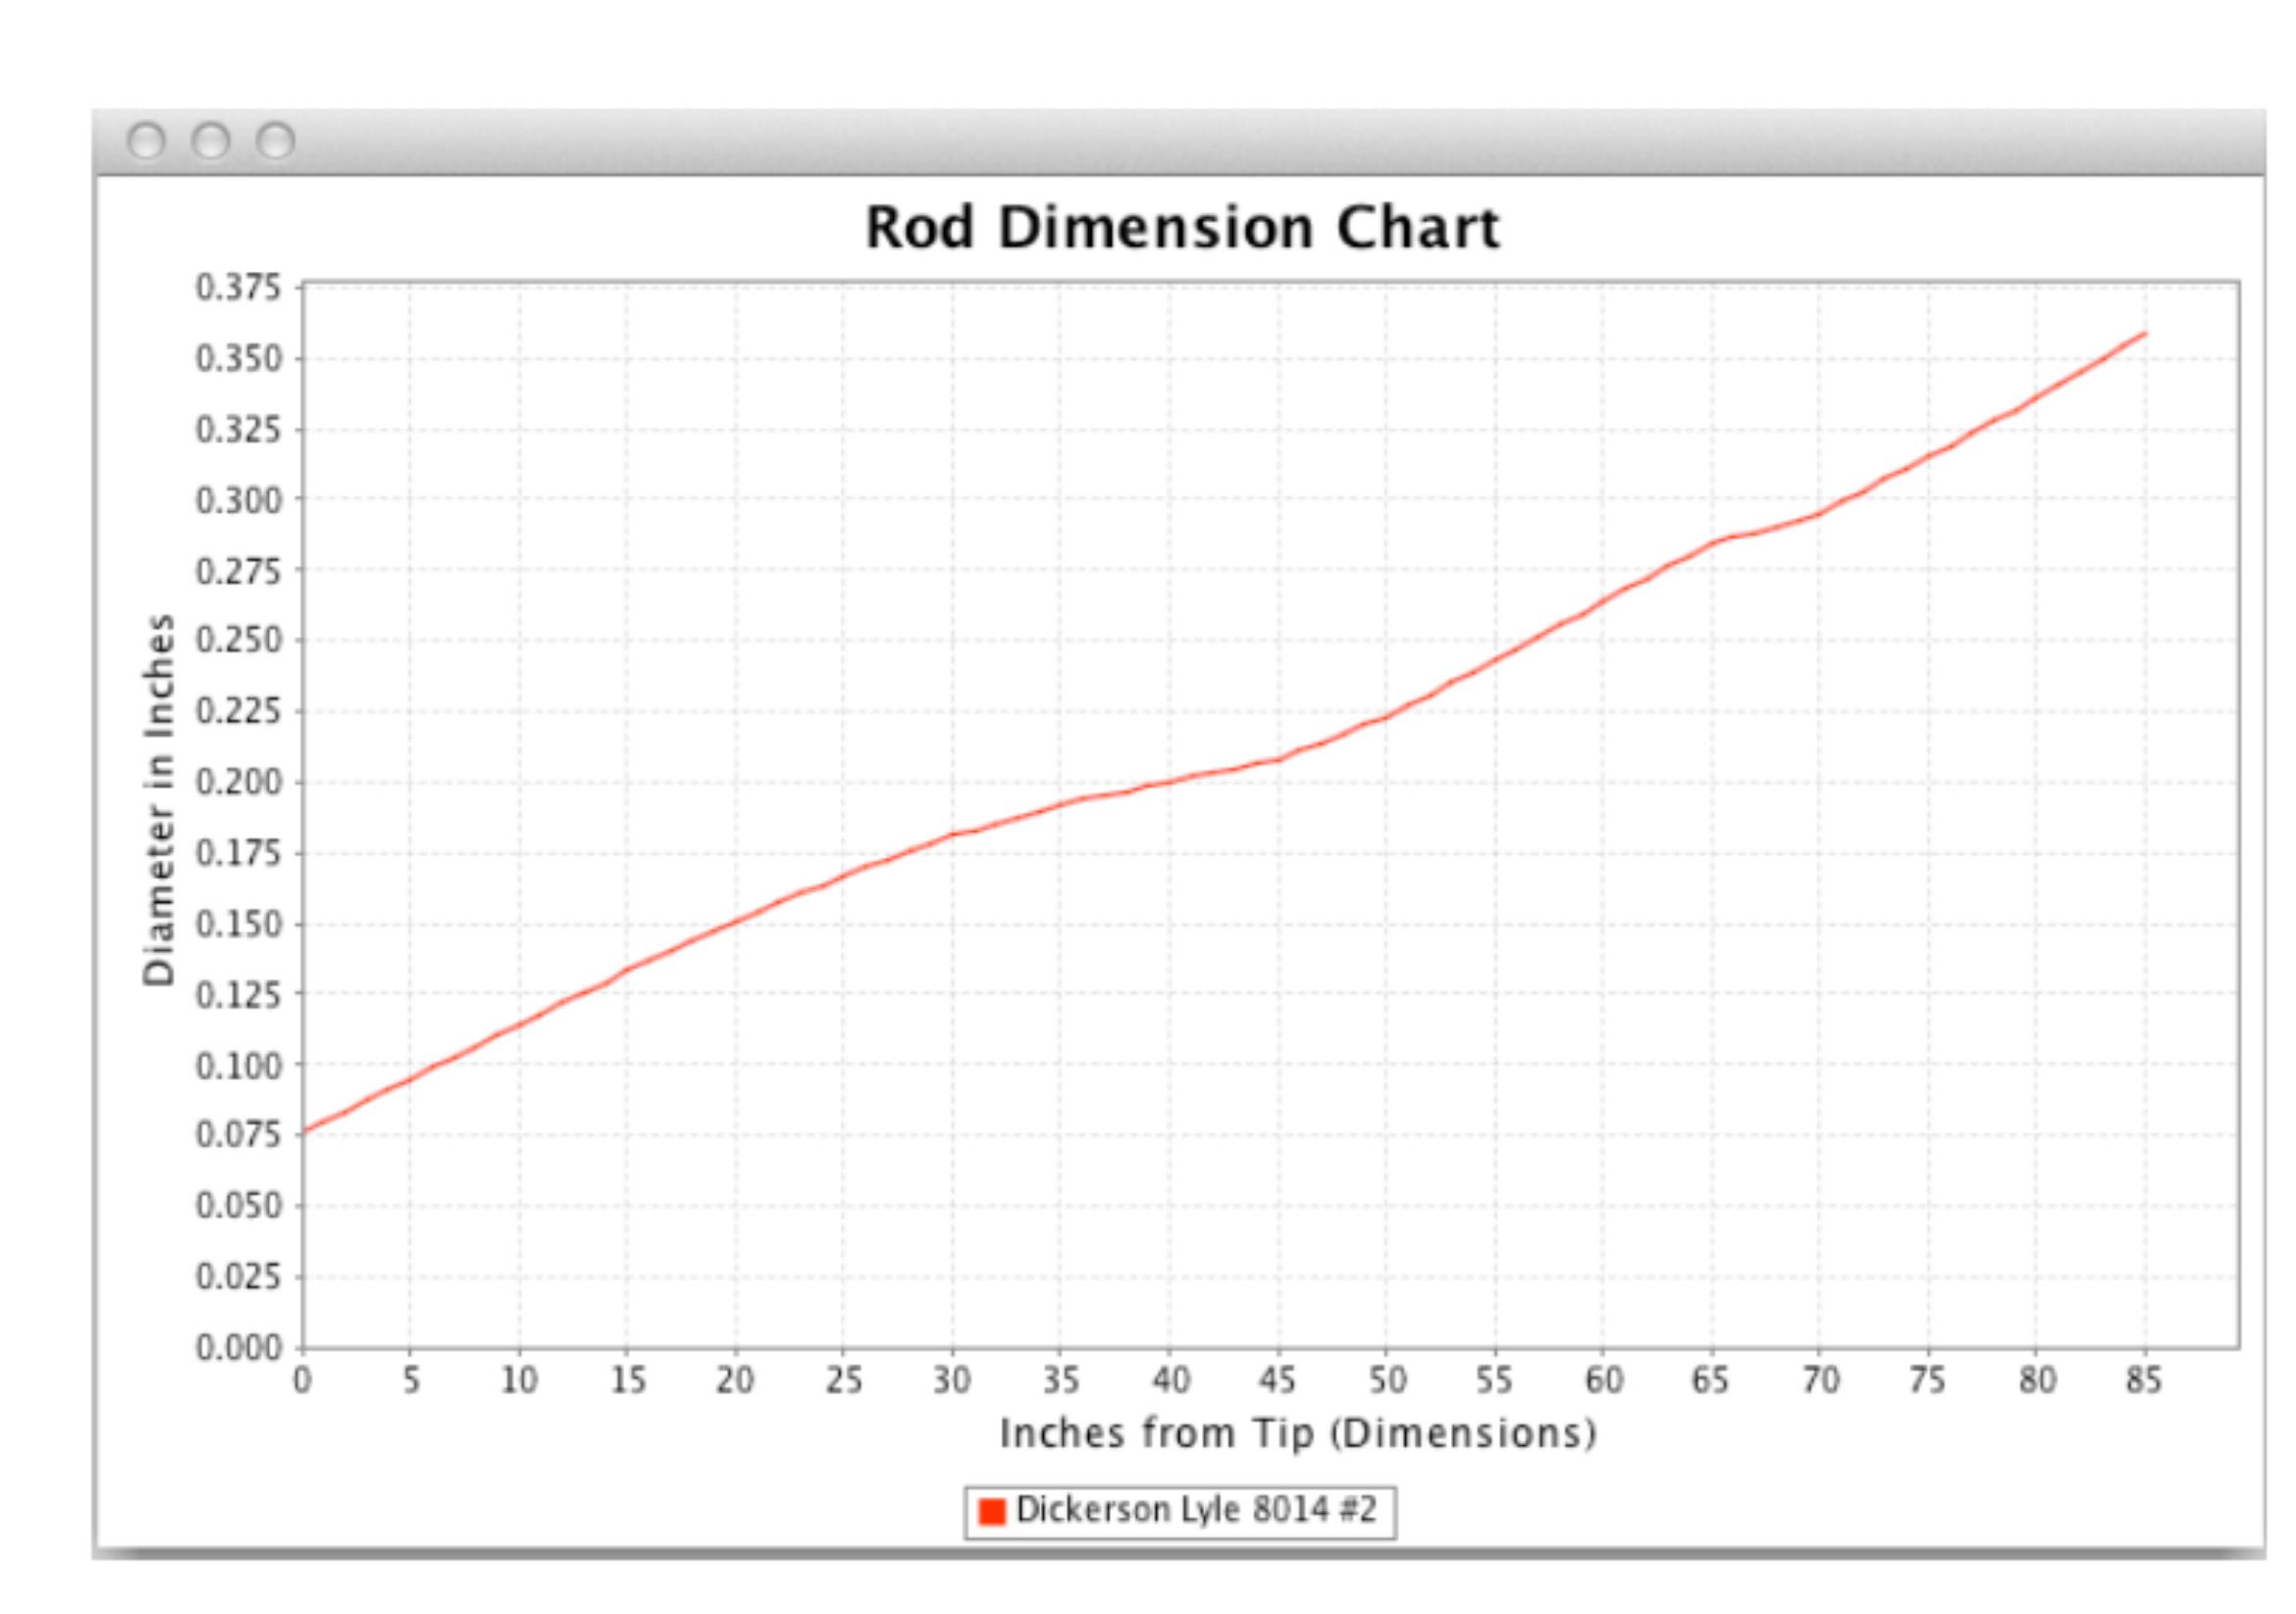 Rod Dimension Chart from A Look At Bamboo Fly Rod Taper by Tom Smithwicke at www.flyfisher.com